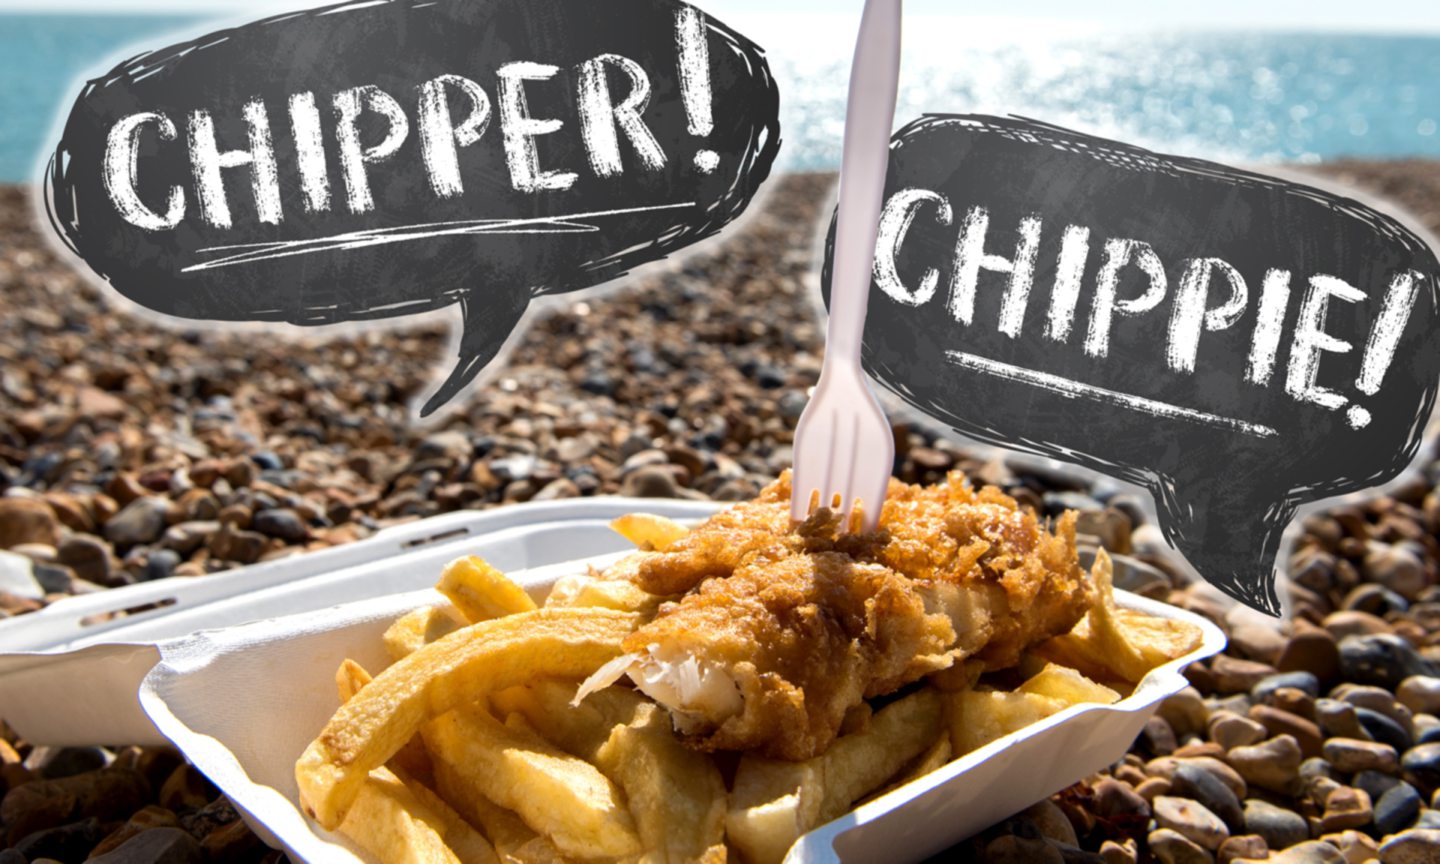 a portion fish and chips sitting on the beach with the words chipper and chippie